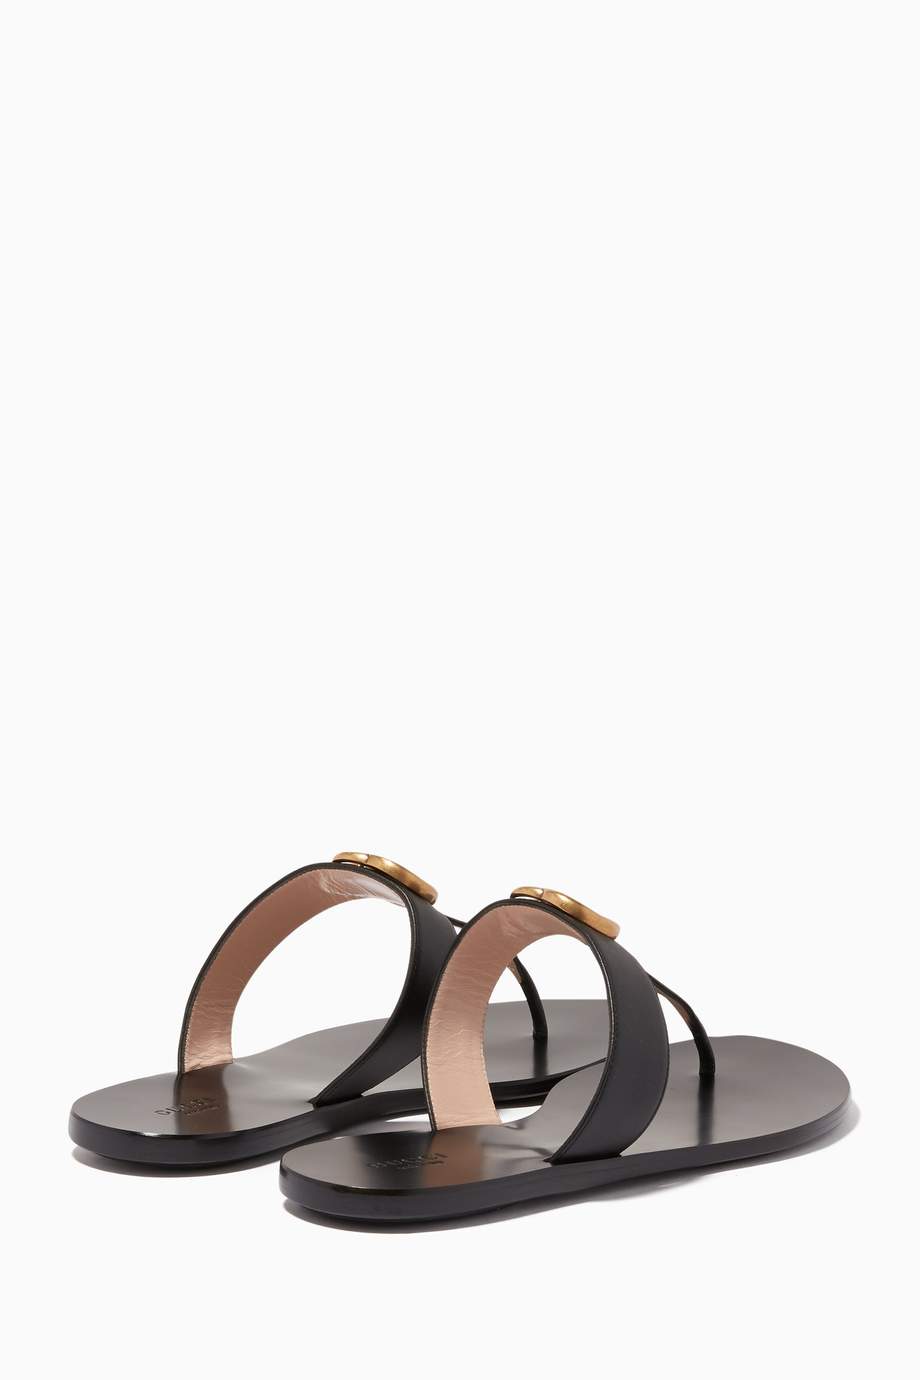 Shop Gucci Black Black Marmont GG Leather Sandals for Women | Ounass UAE